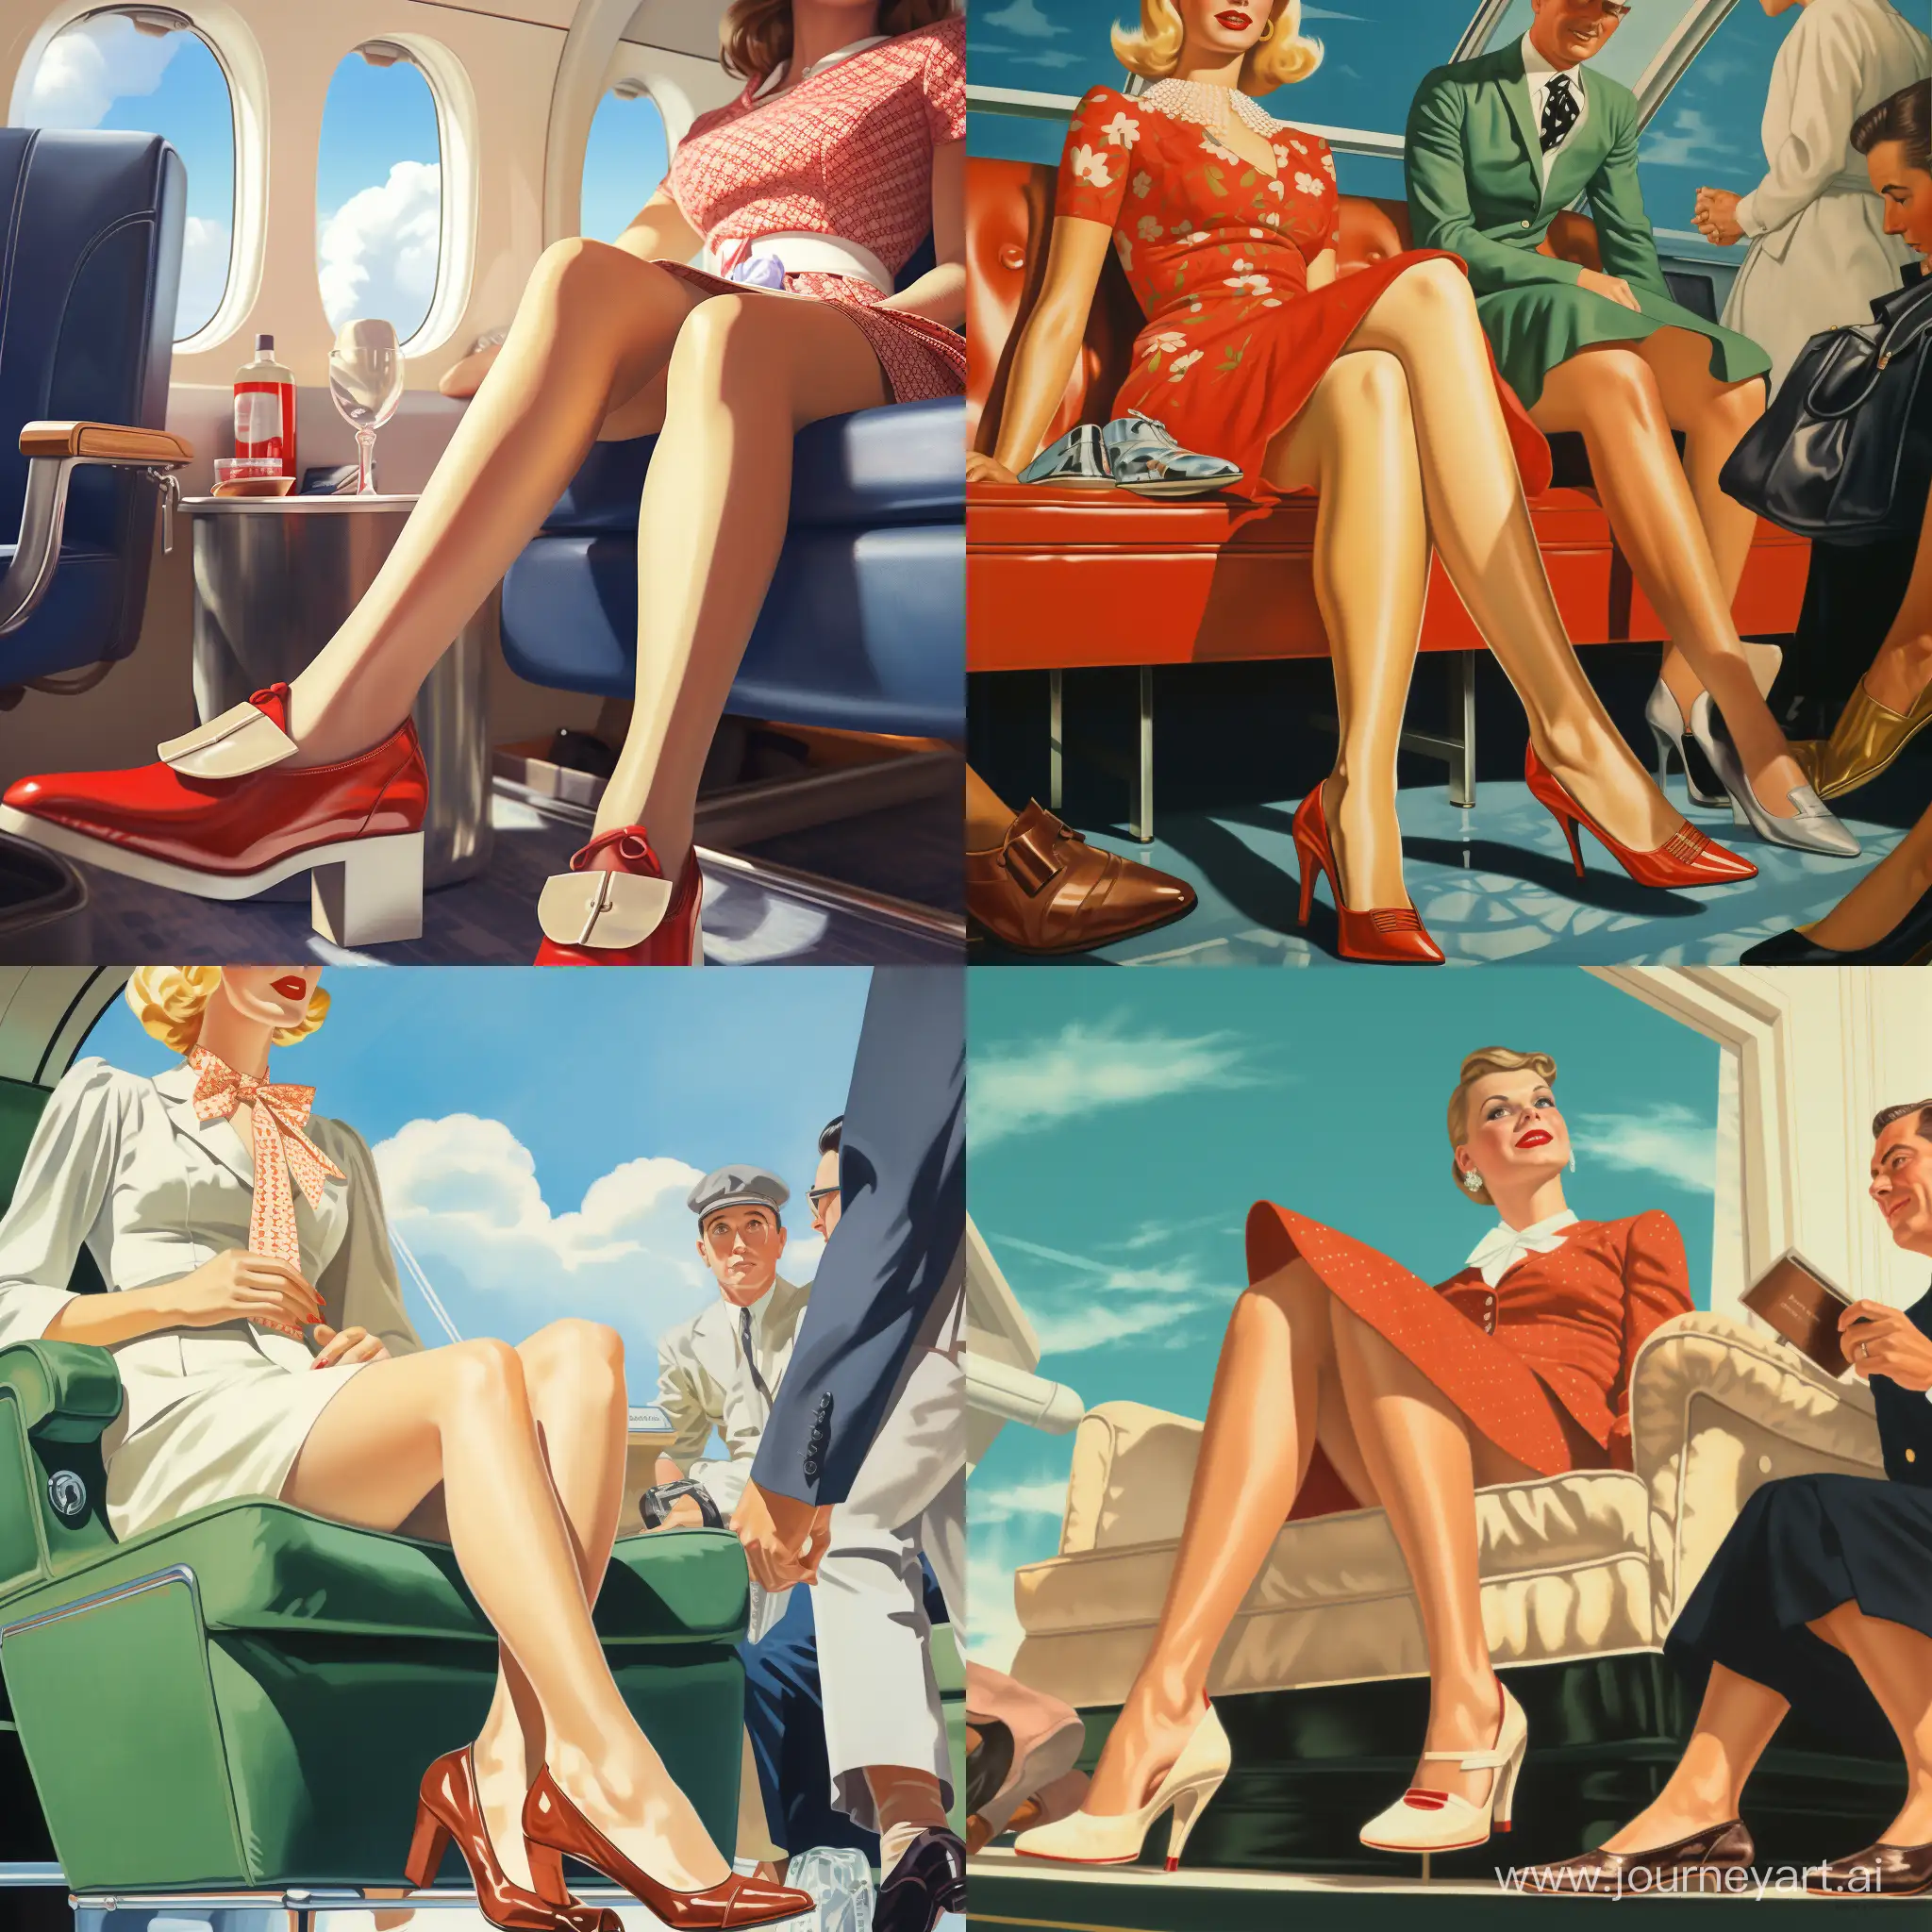 close up of the feet of a stylishly dressed woman wearing patent platform pumps sitting on an airliner in first class while tiny female flight attendants at her feet polish her shoes.